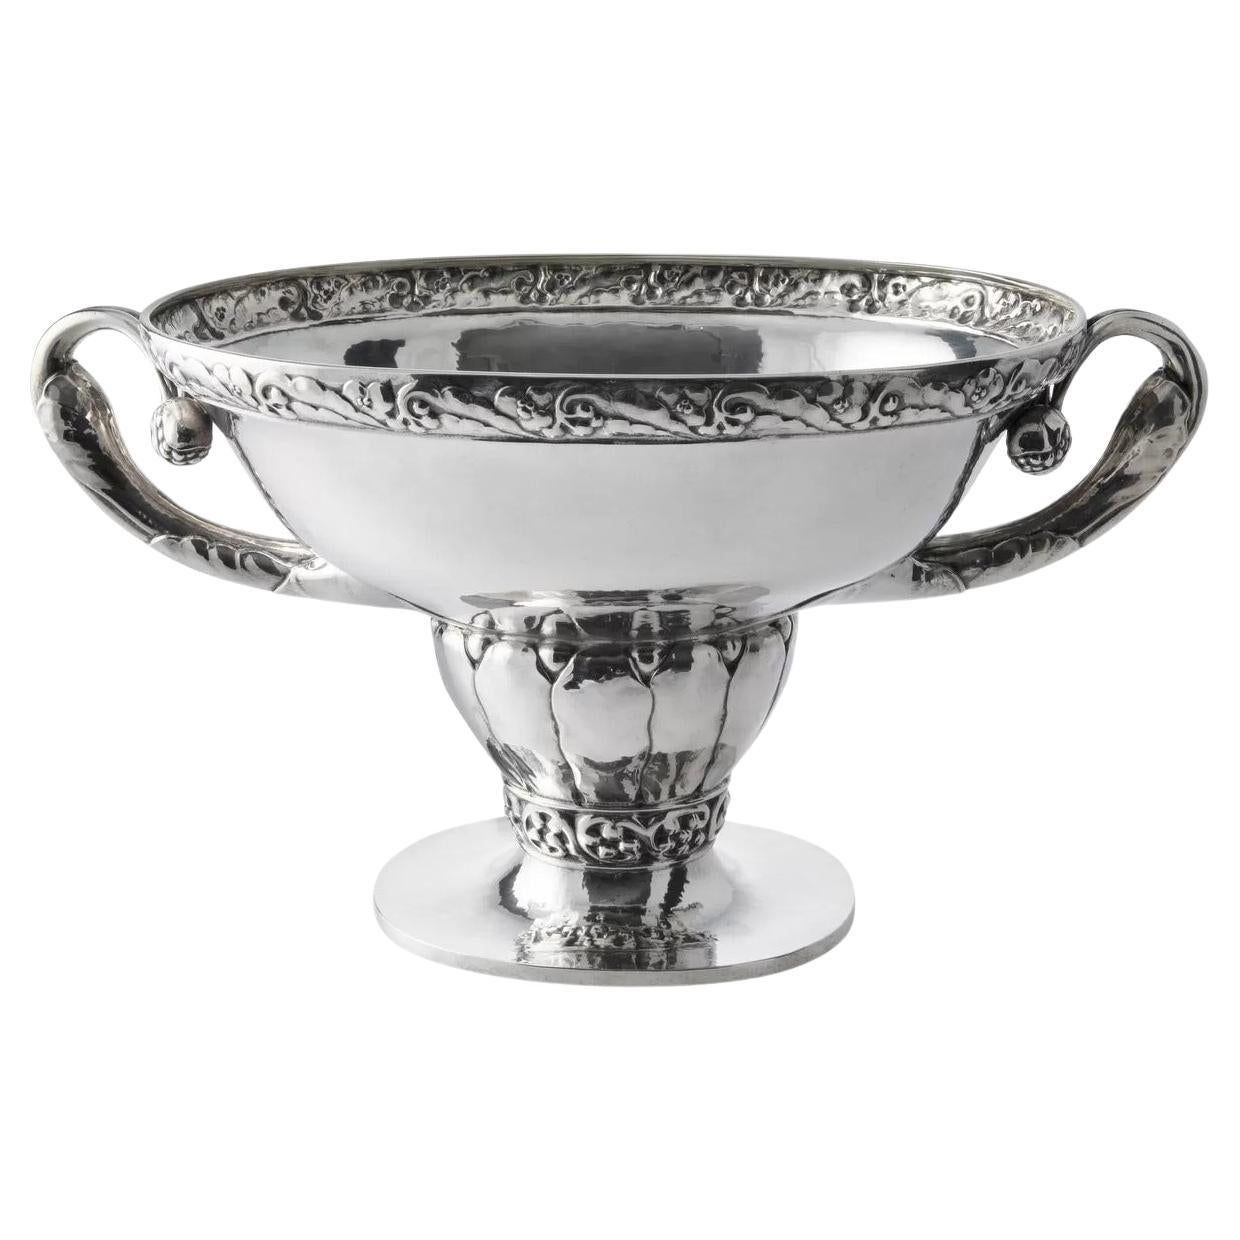 Extremely Rare Georg Jensen Silver Jardinière 165 For Sale